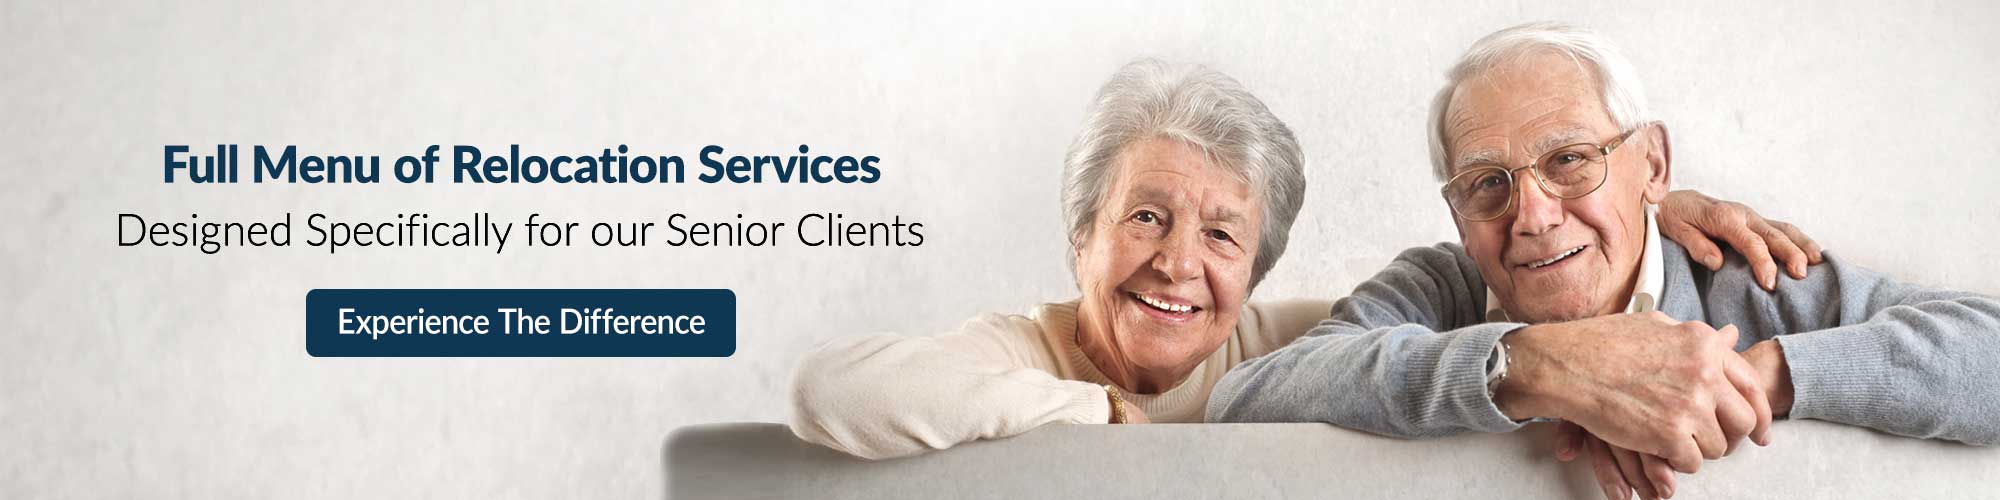 Senior Relocation Services At The Senior Movers